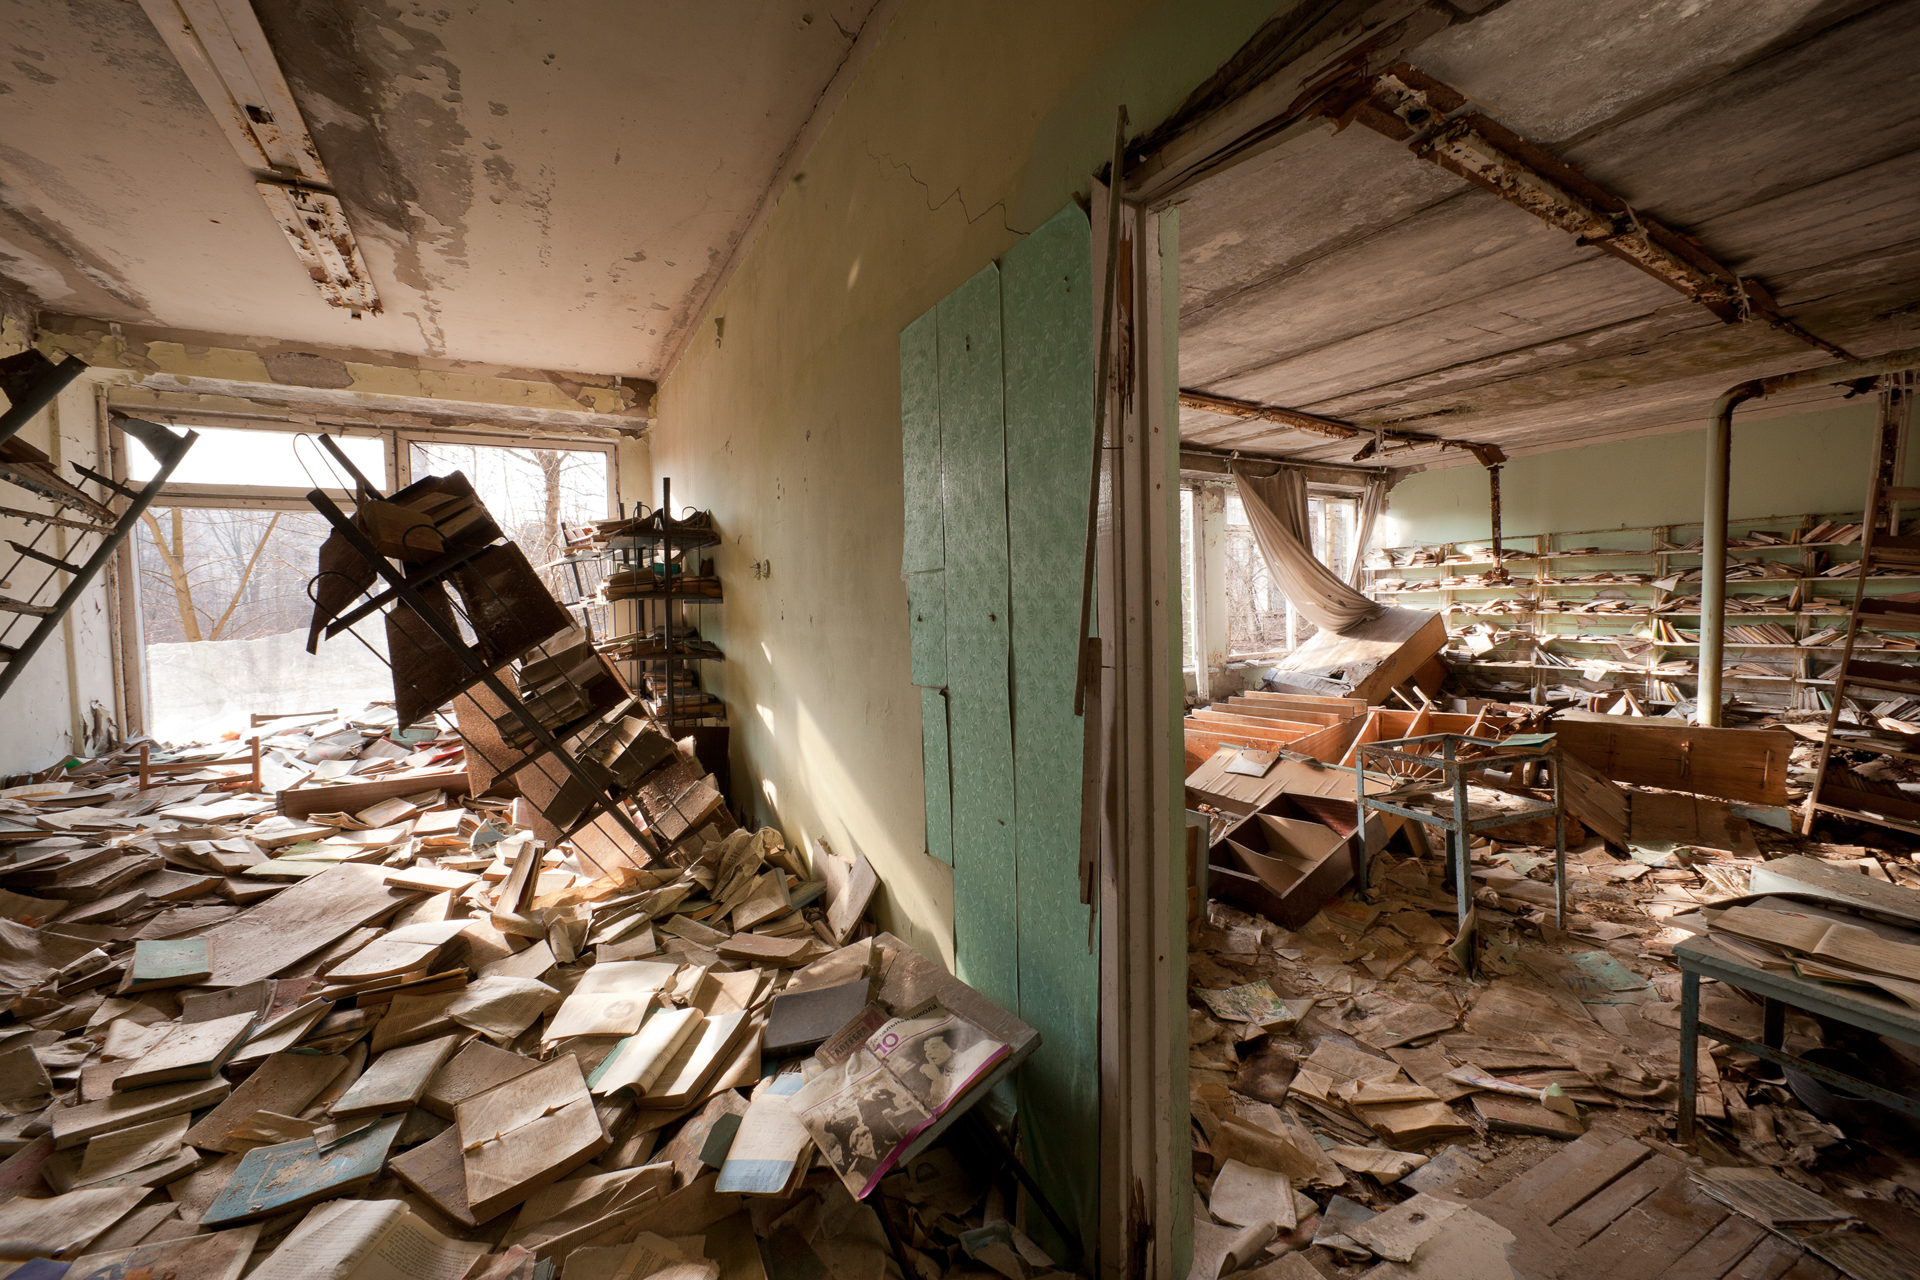  Books rot and paint peels in a school library.  Pripyat, Ukraine  